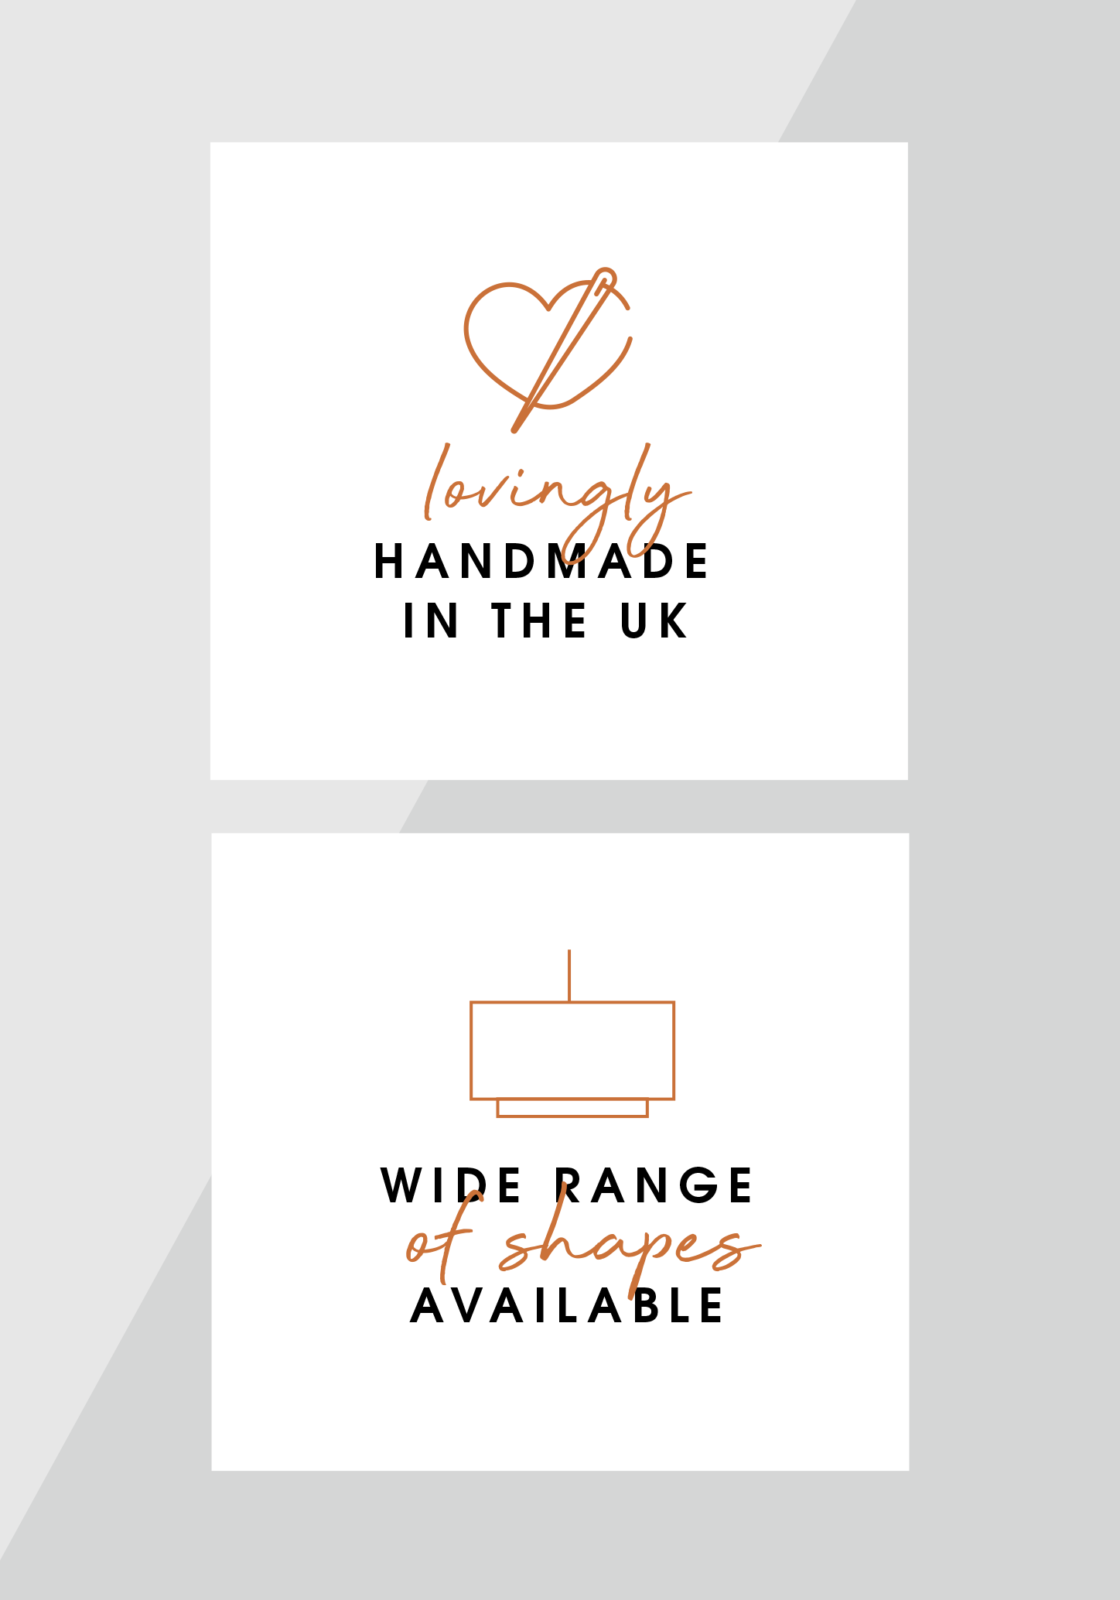 Lovingly handmade in the UK | Wide range of shapes available